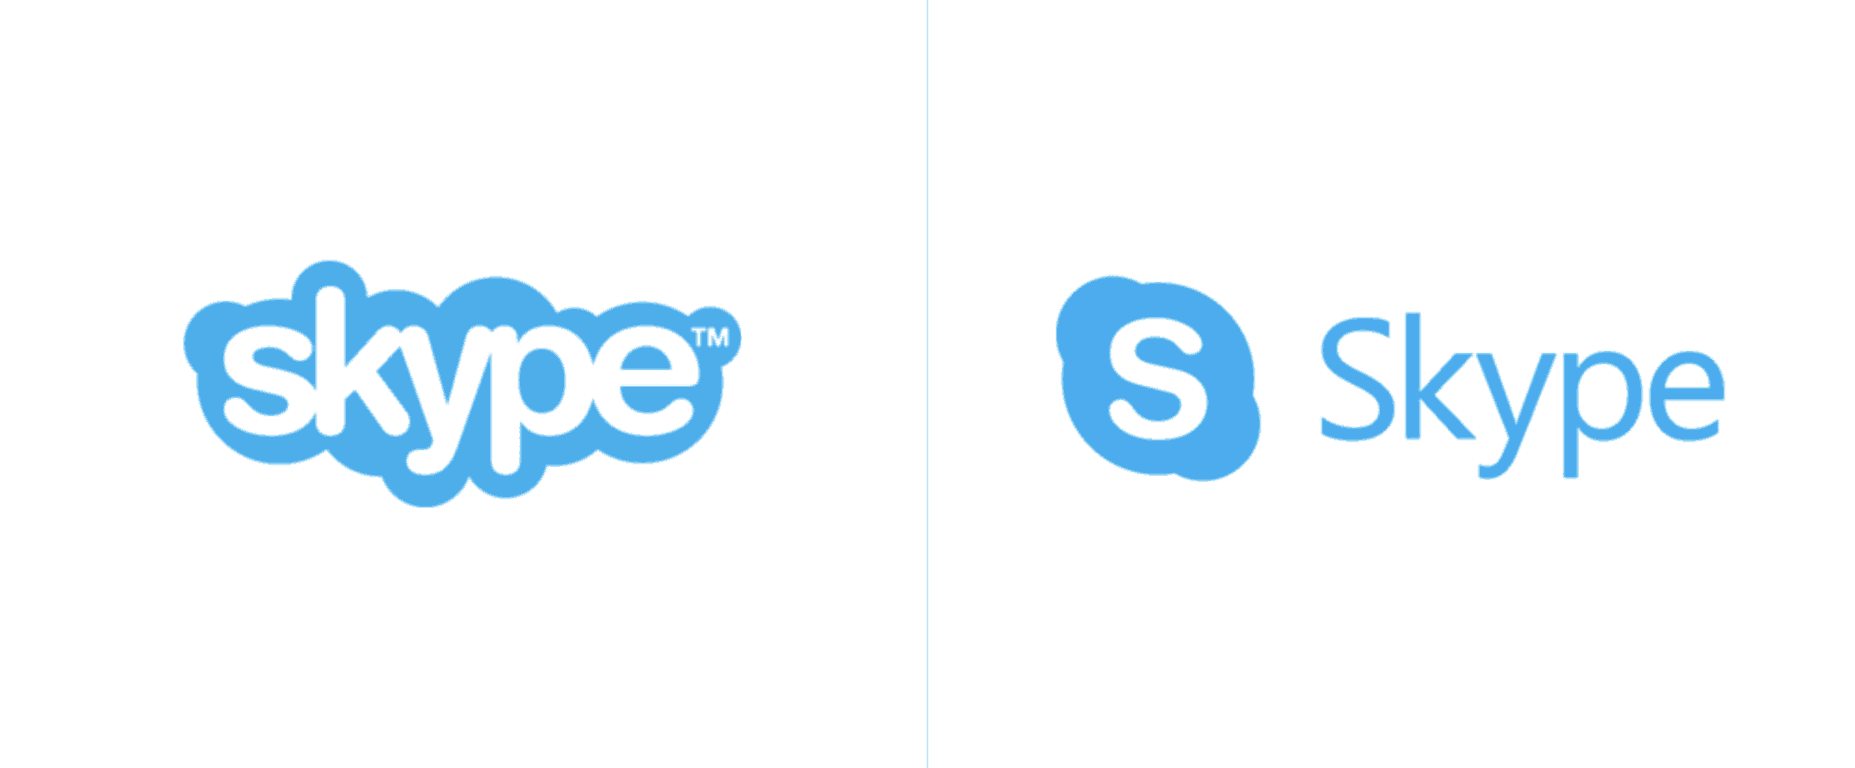 Microsoft introduces a new Skype logo ahead of the app's big redesign ...